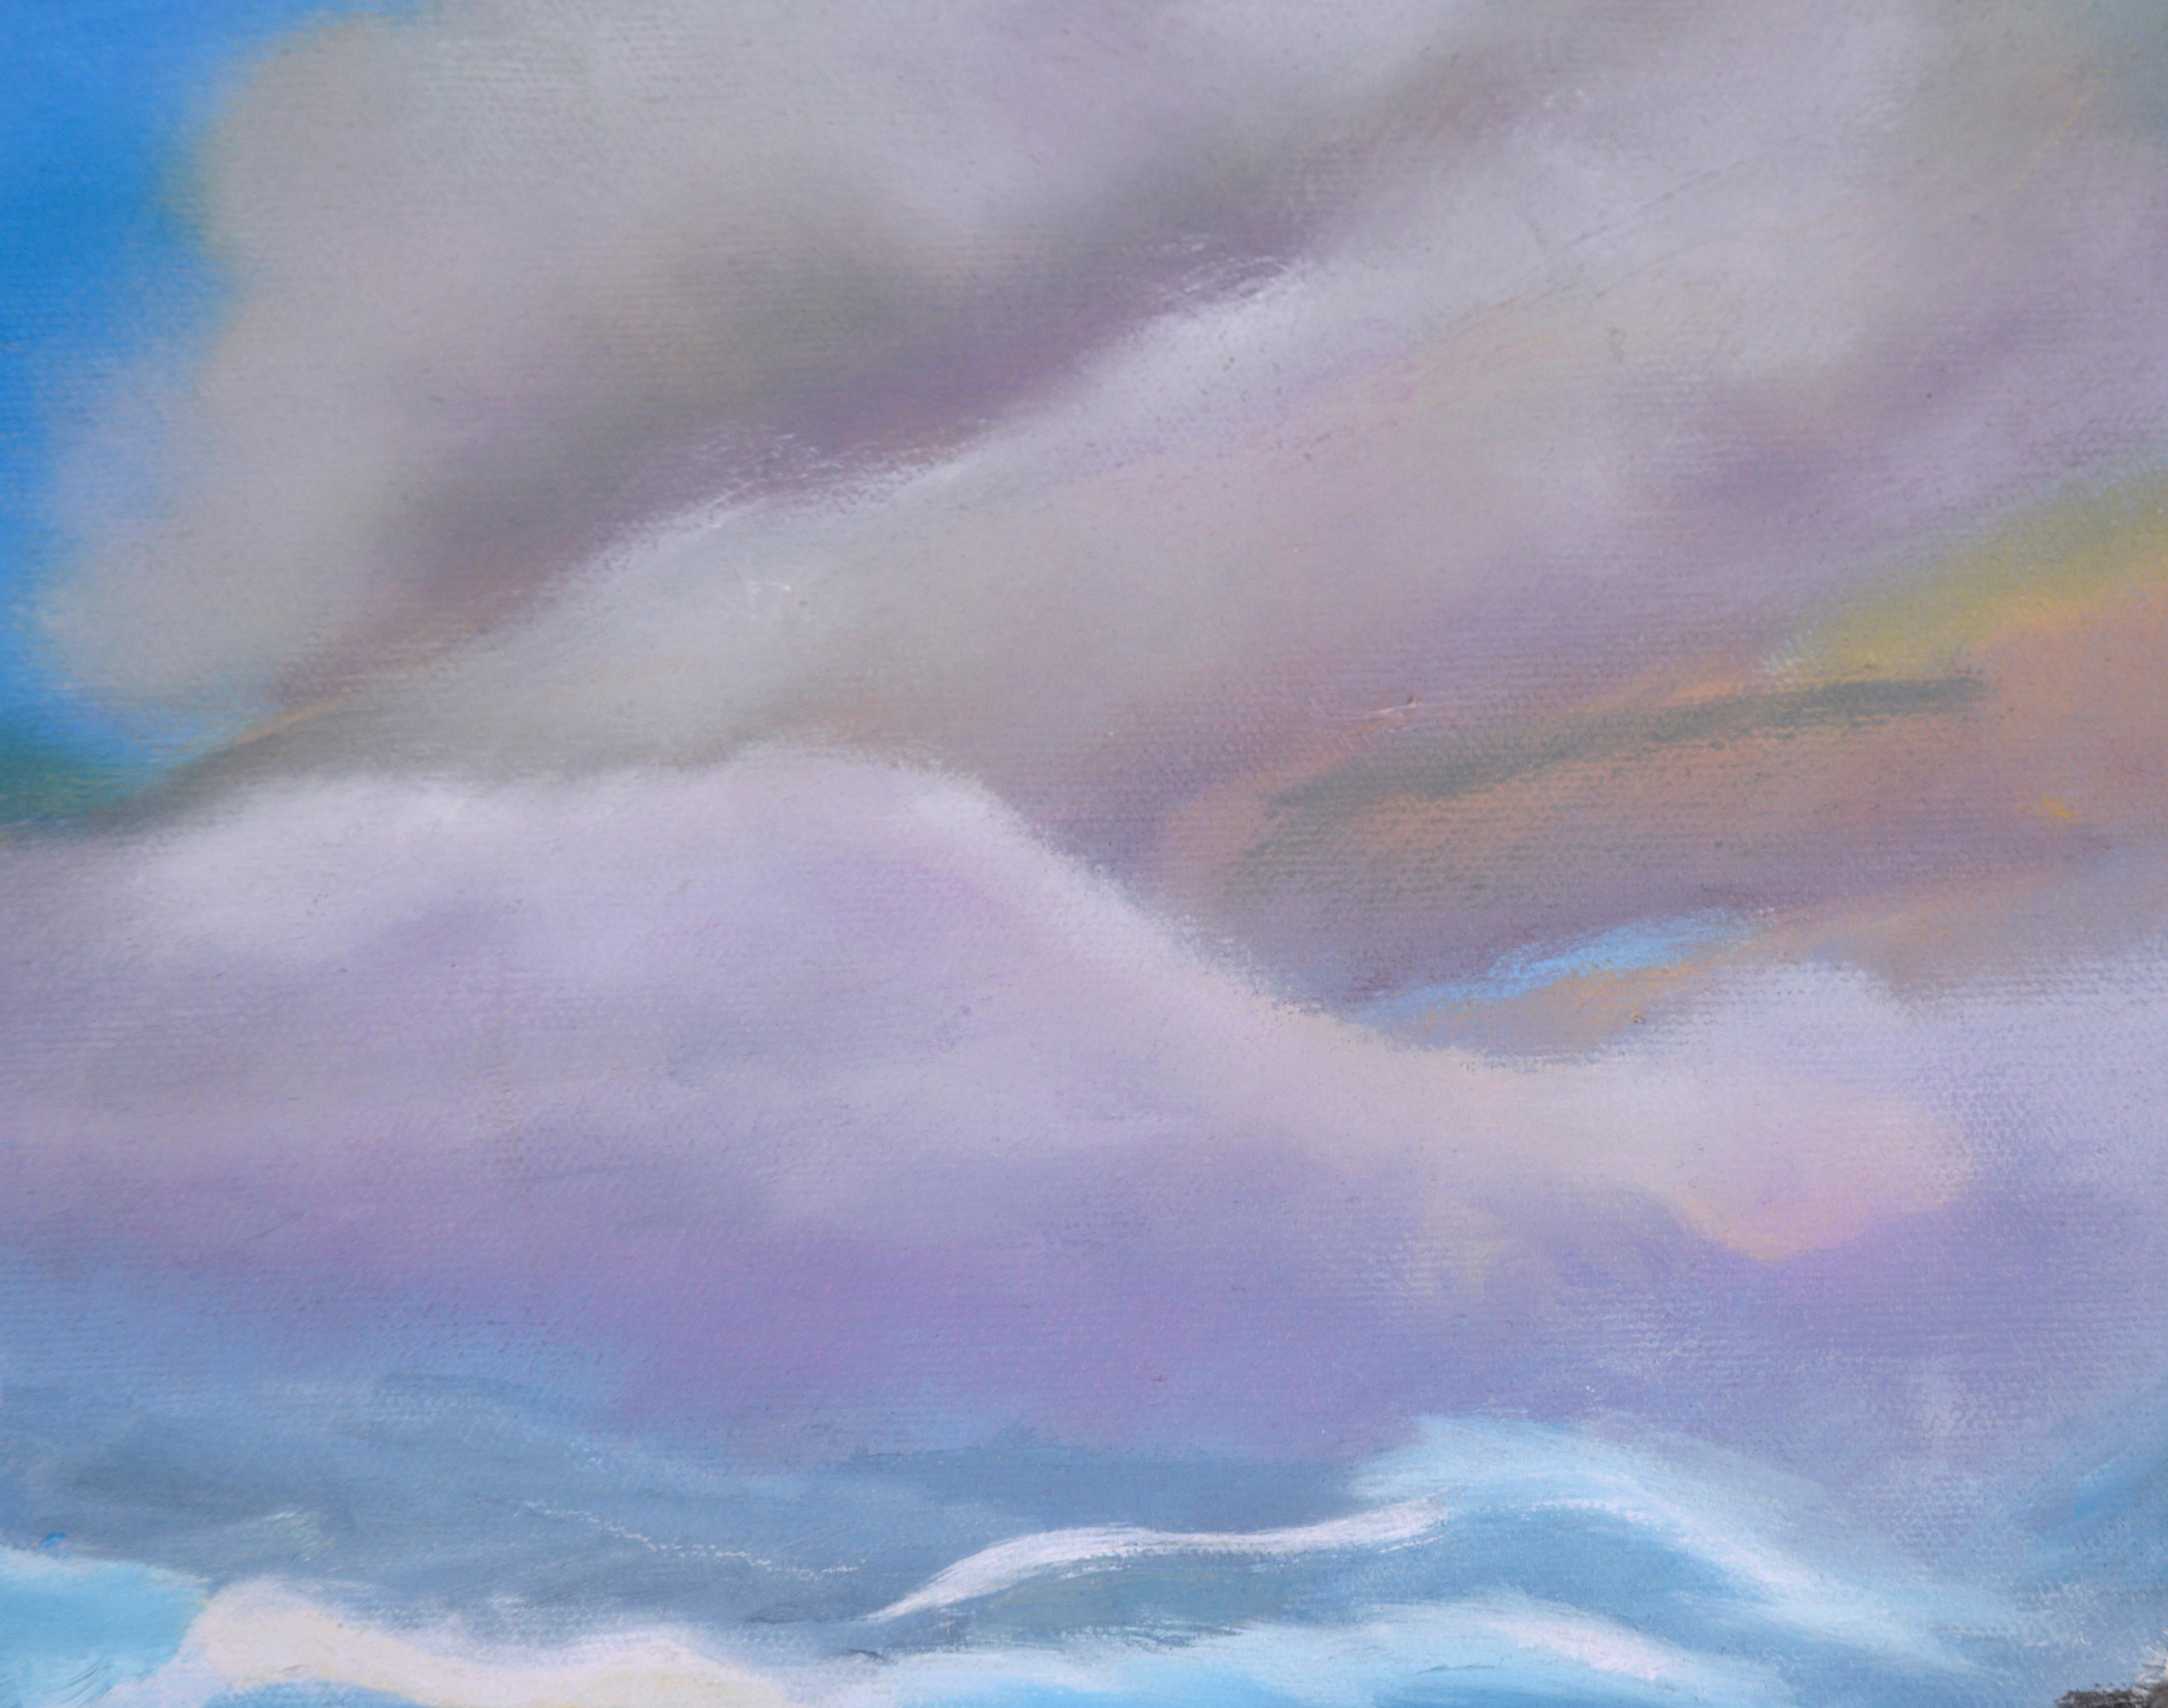 Waves Crashing Under Purple Clouds - Seascape Original Oil on Canvas

Glowing seascape by Mai Tracy Kikuchi (20th Century). Large waves are rolling in, shown in light blue, implying translucency. The purple clouds above are reflected in the water